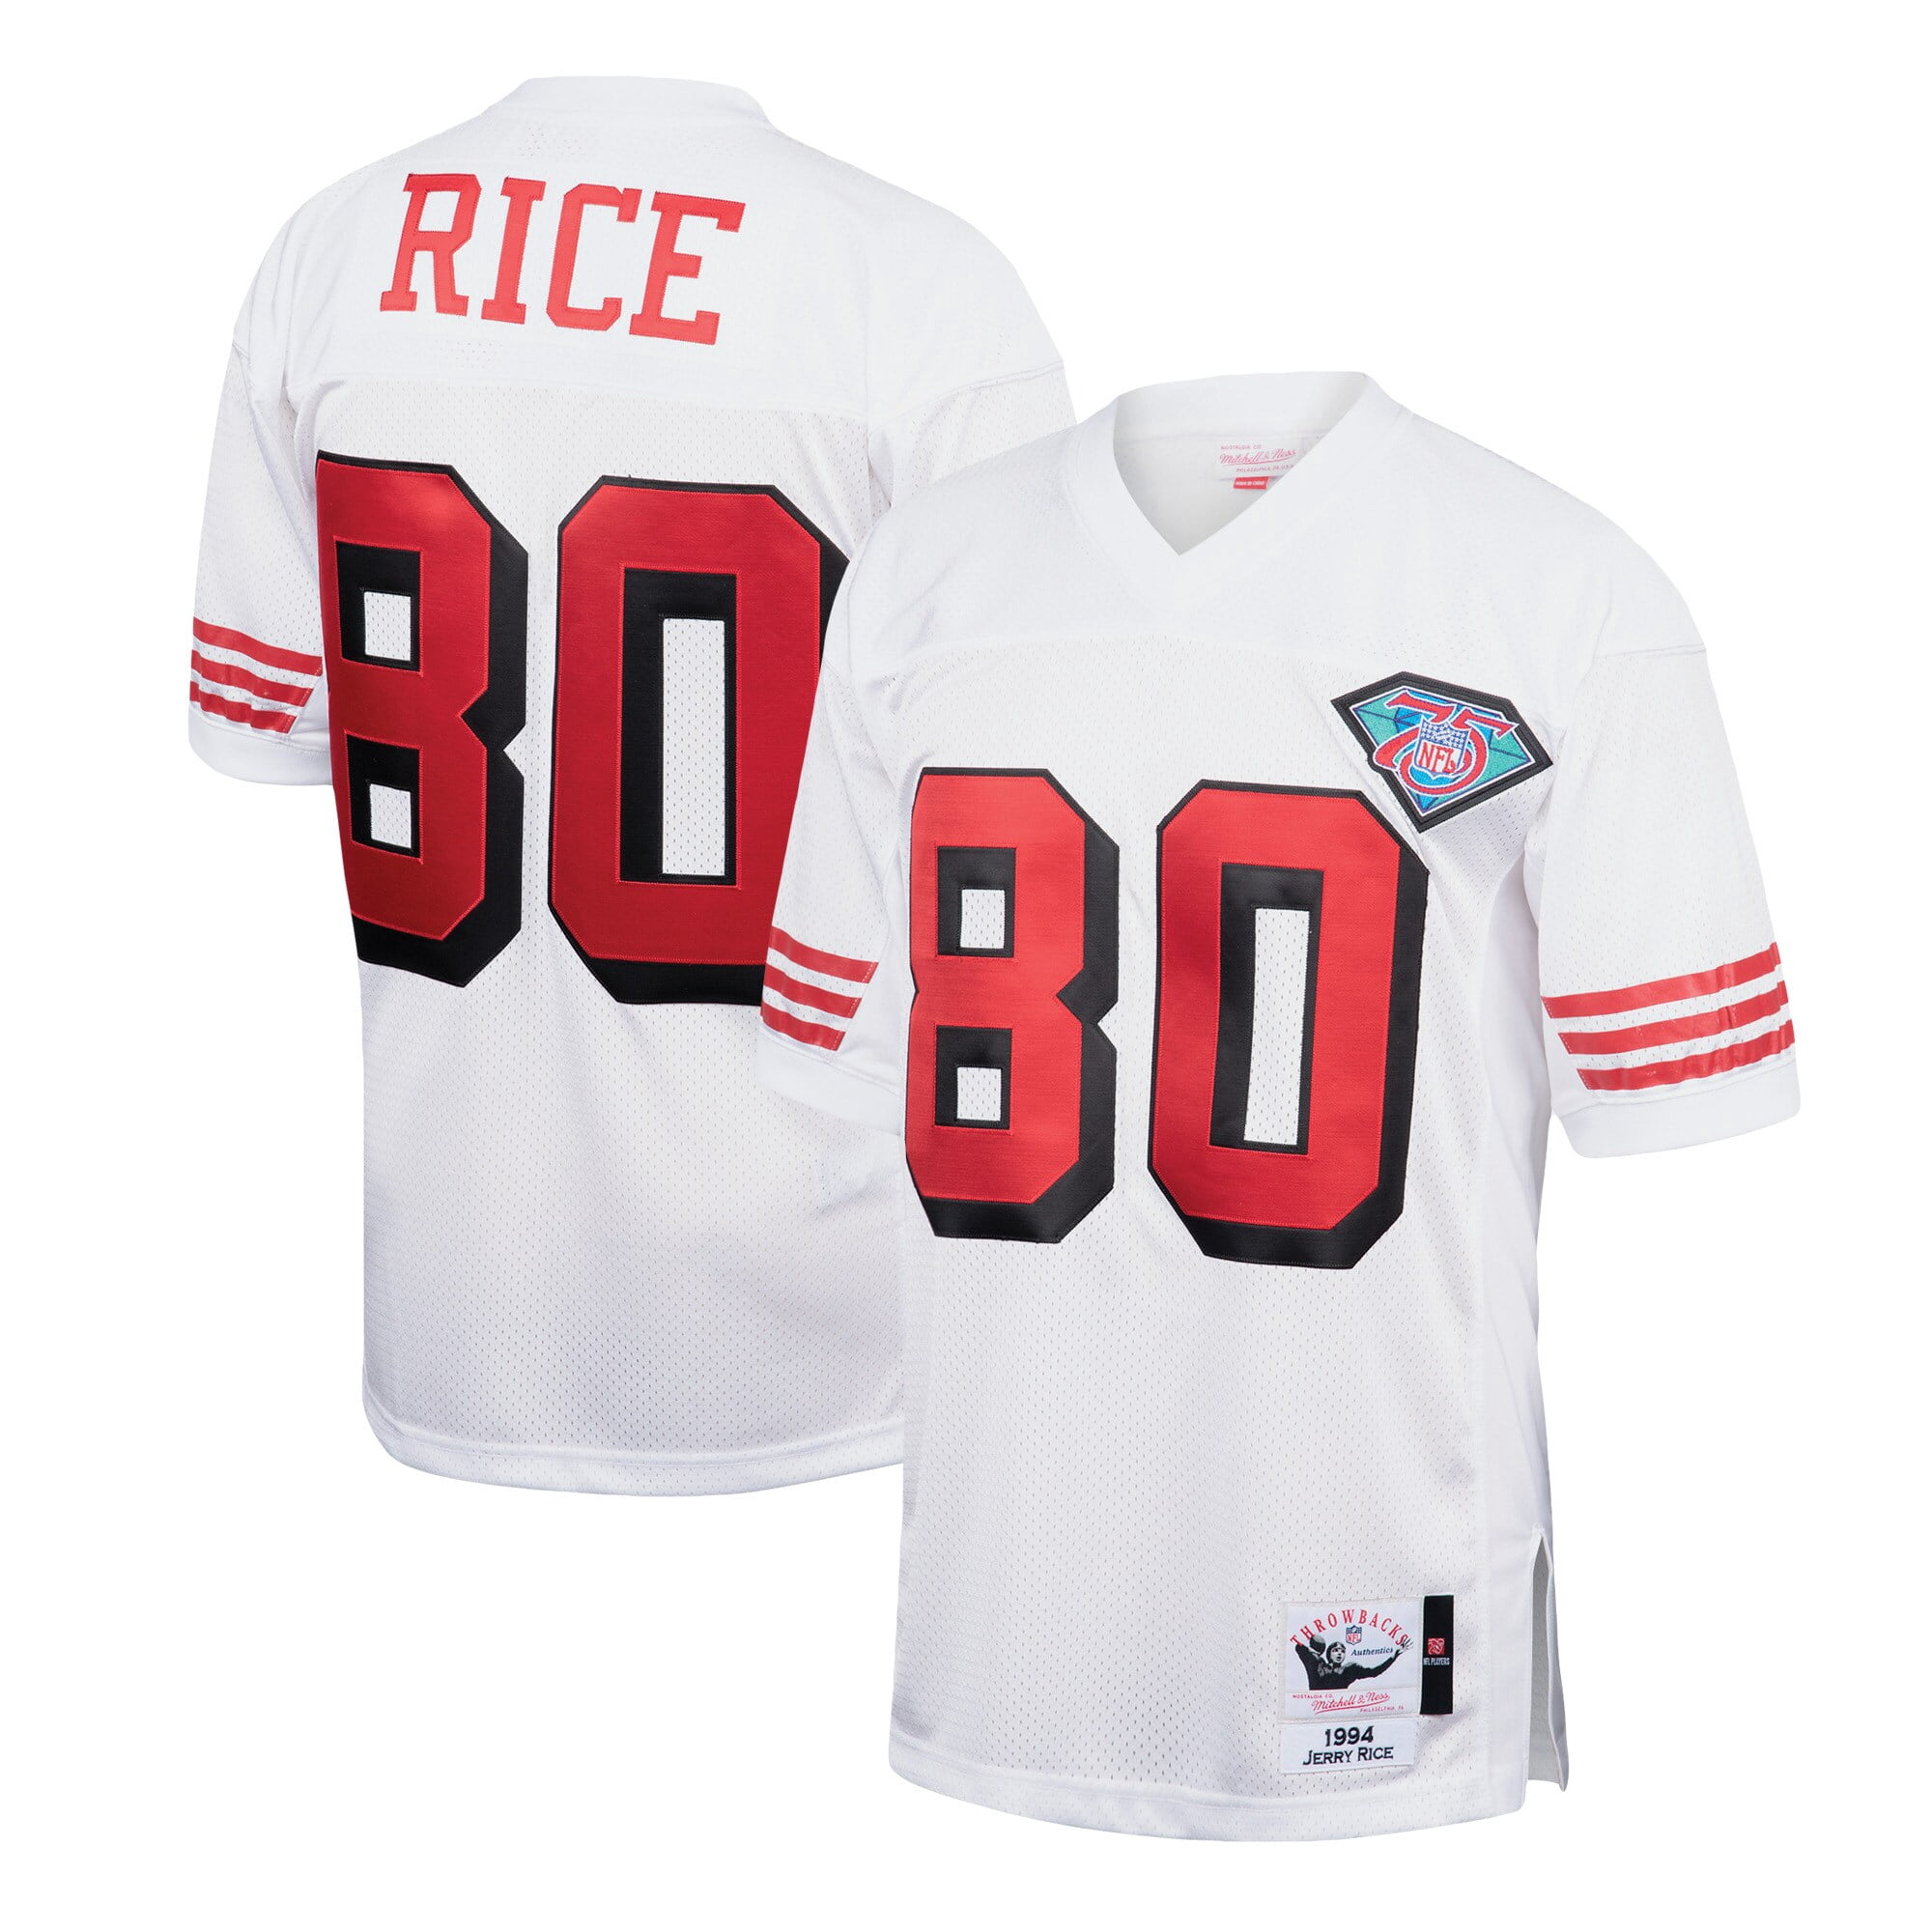 Jerry Rice Mitchell & Ness Authentic San Francisco 49ers Jersey